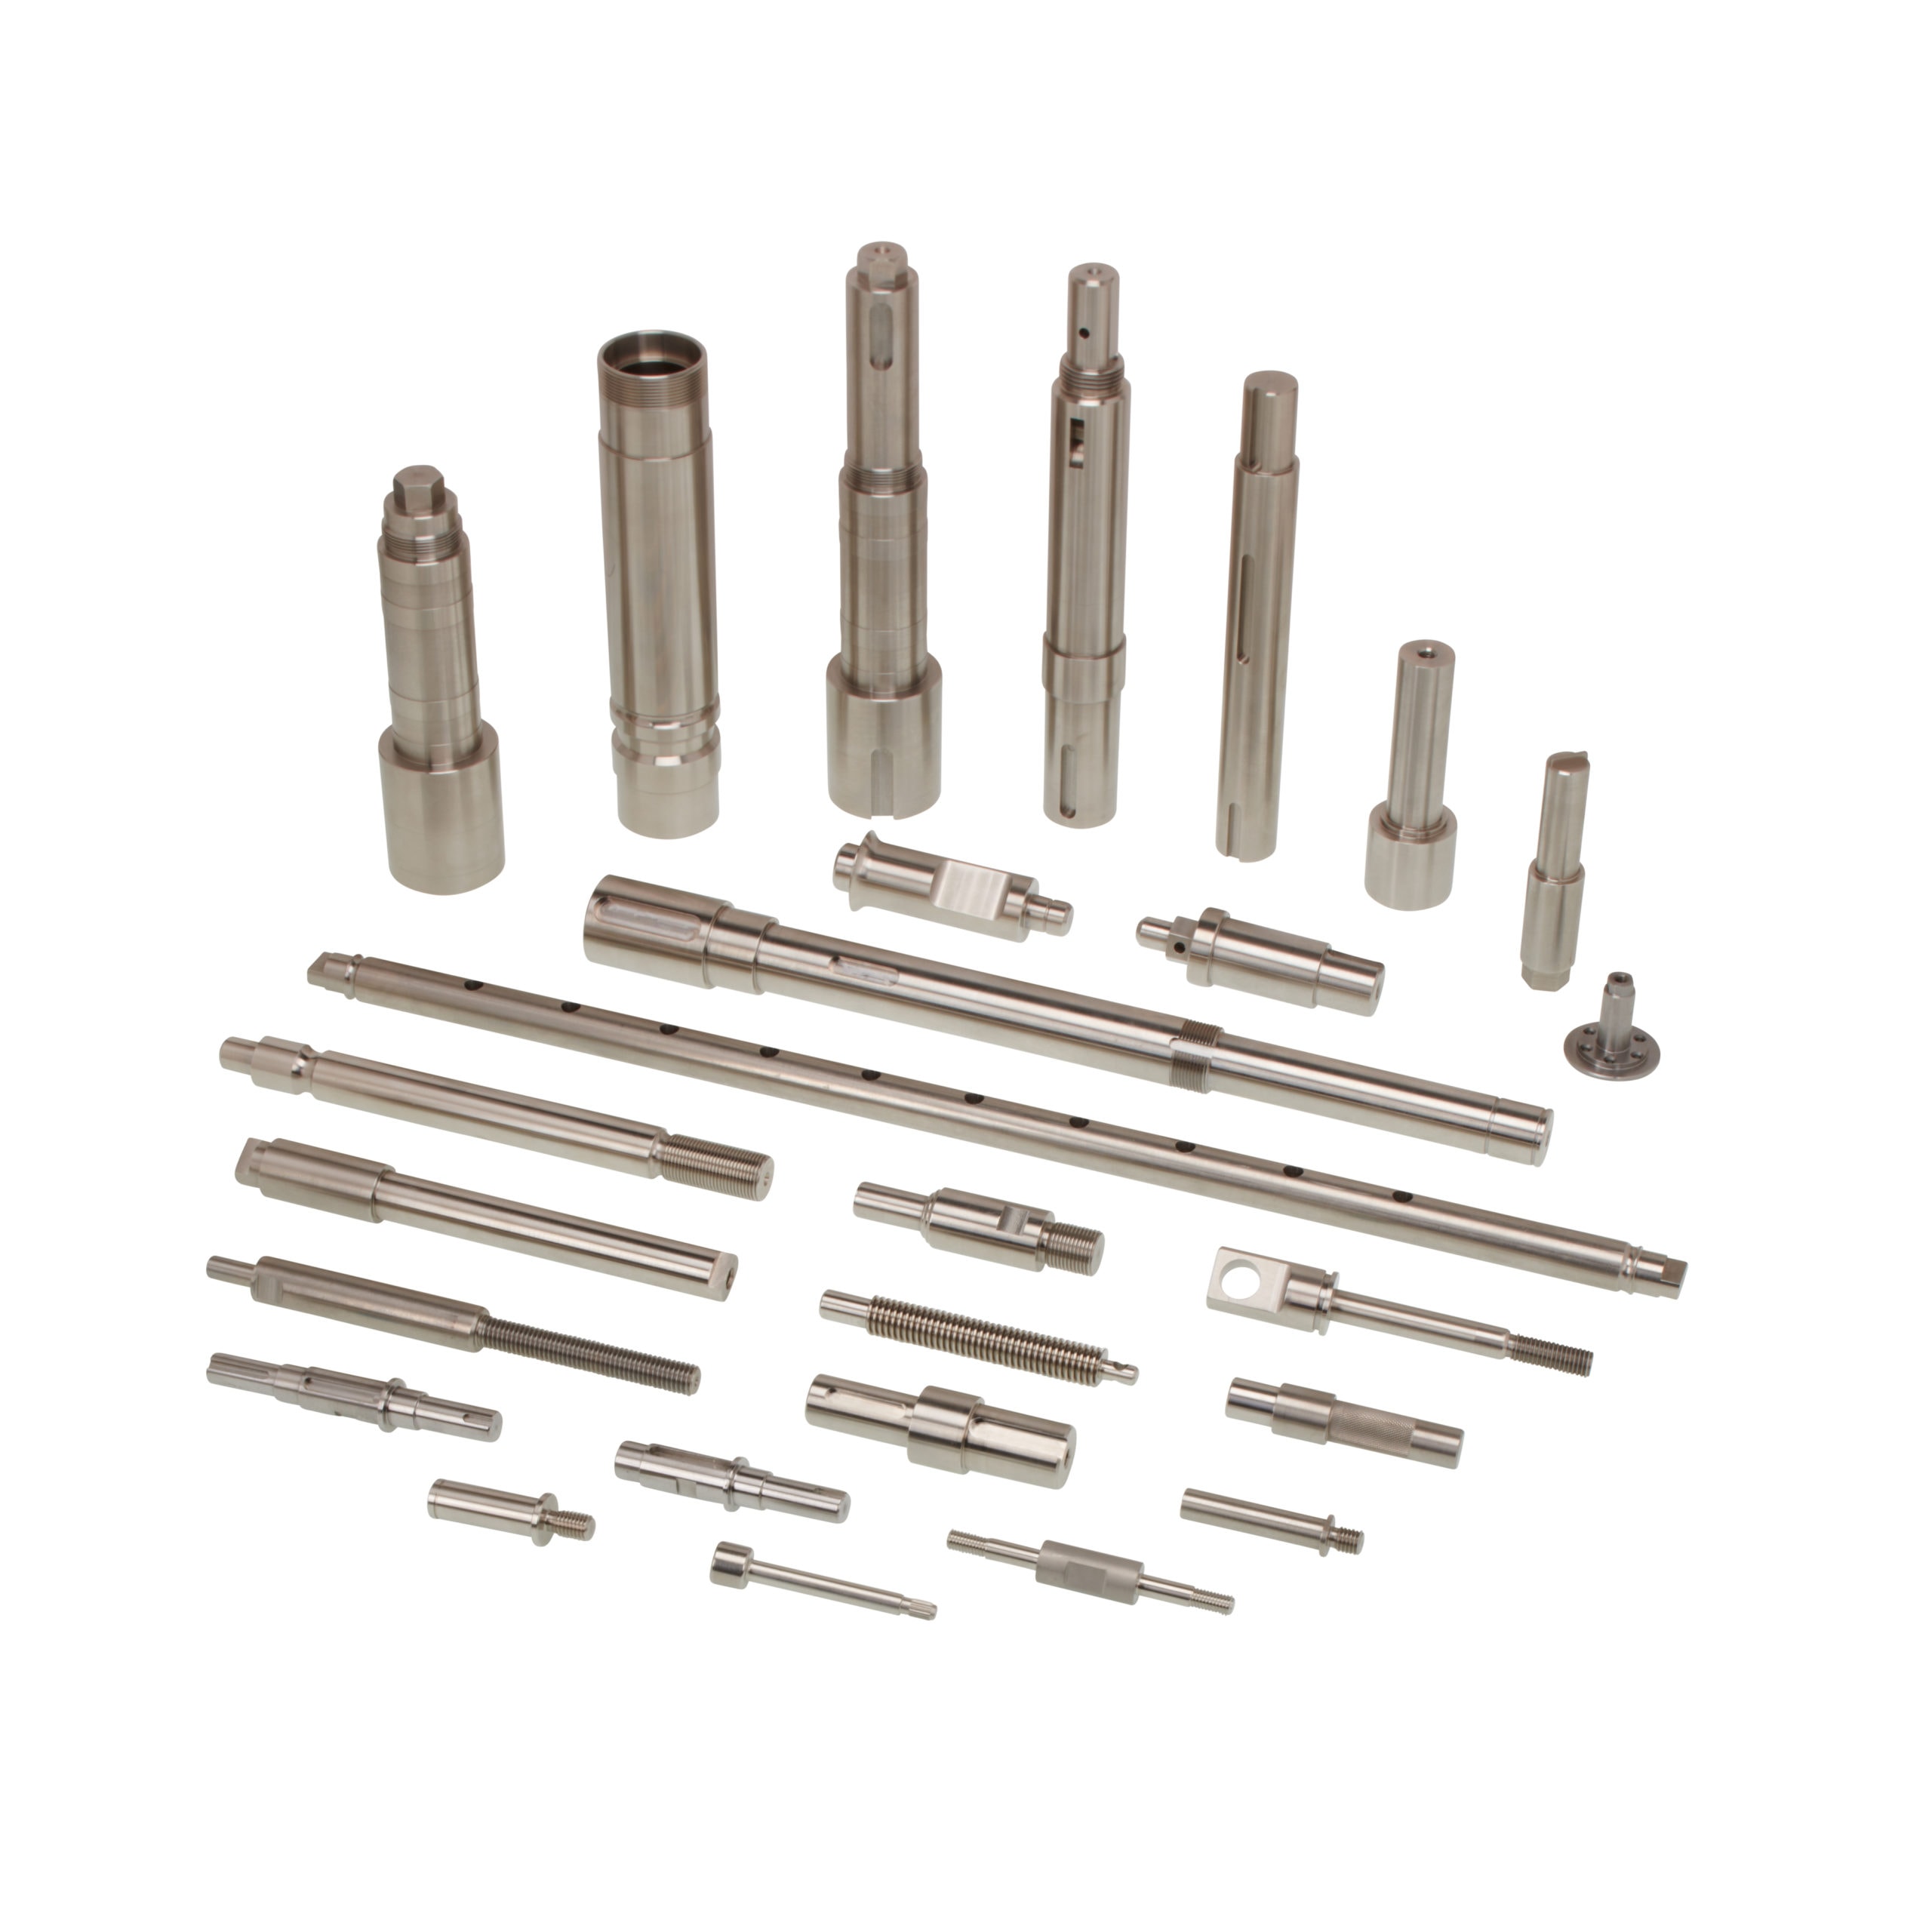 Variety of CNC Turned Parts - CNC Turning Services